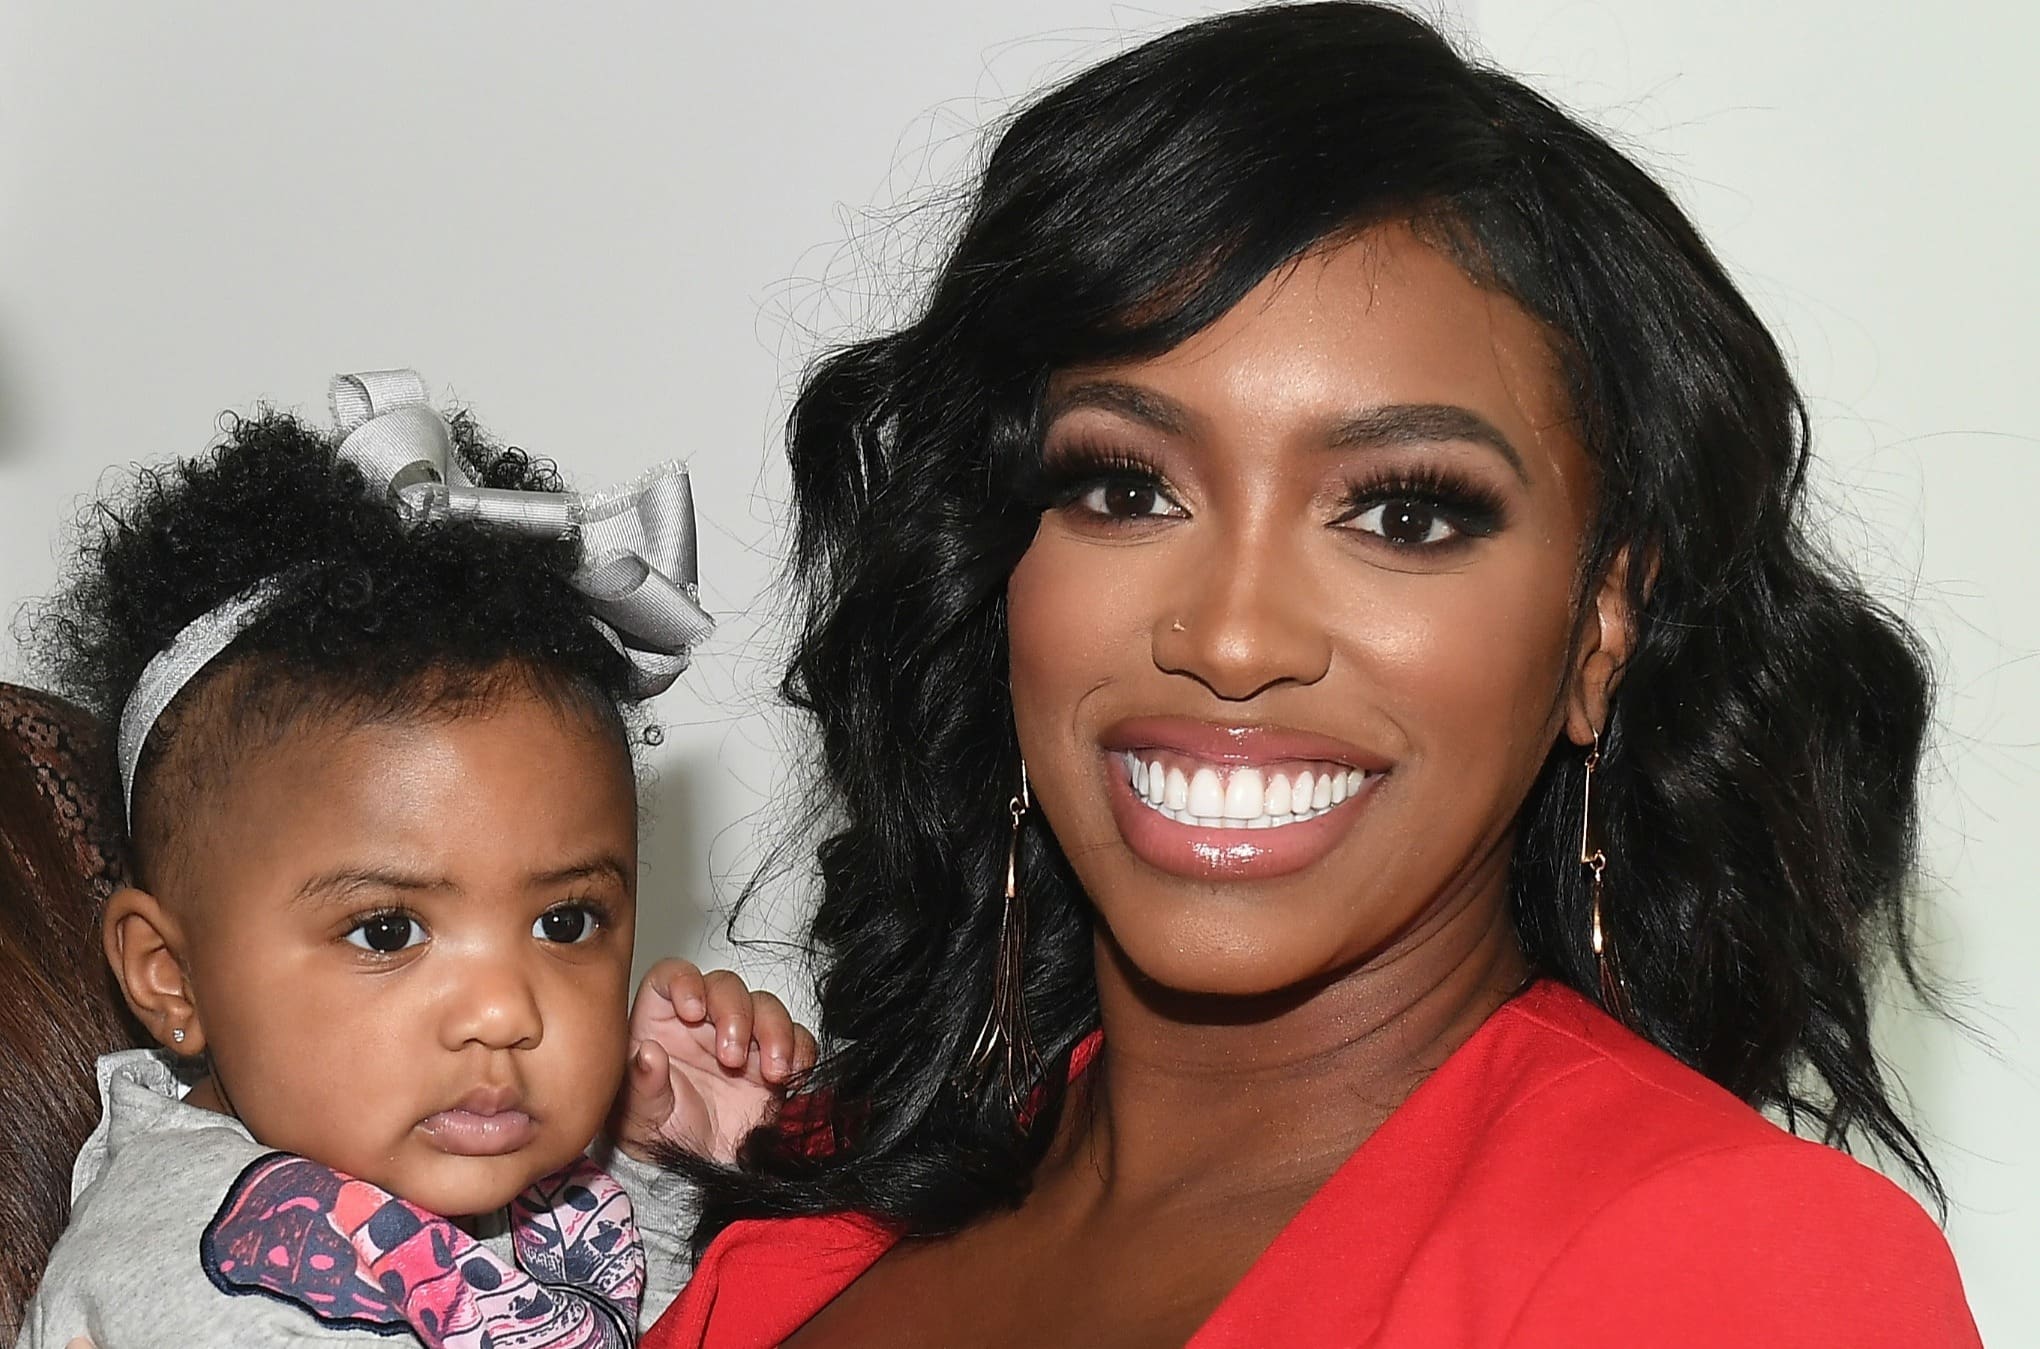 Porsha Williams’ Daughter, Pilar Jhena Is The Cutest In This Video